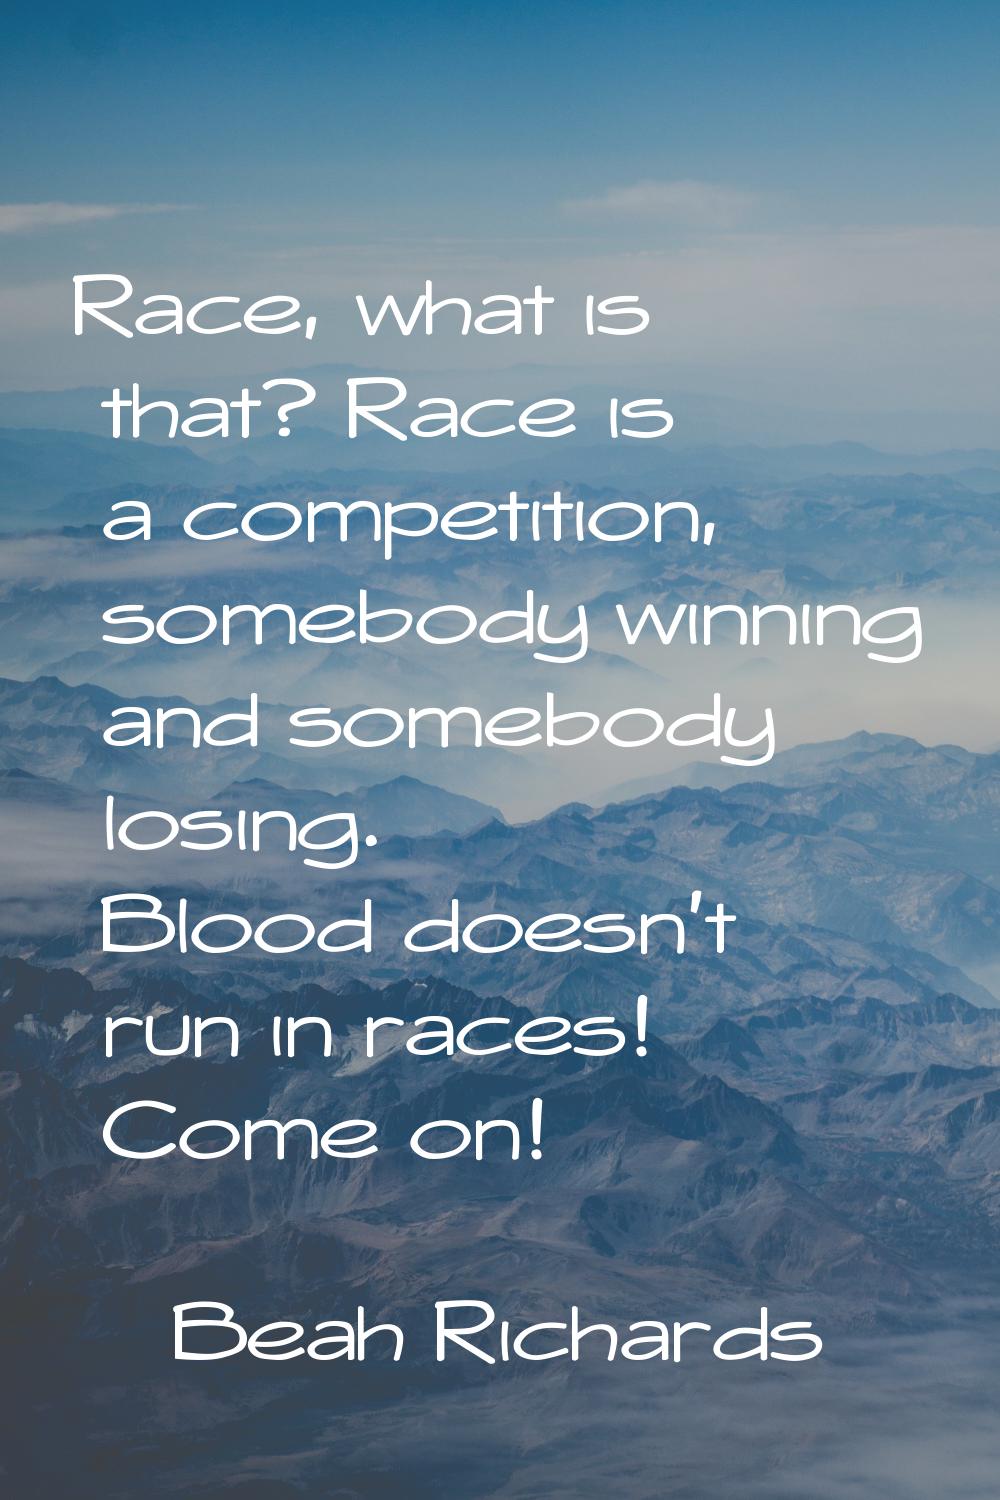 Race, what is that? Race is a competition, somebody winning and somebody losing. Blood doesn't run 